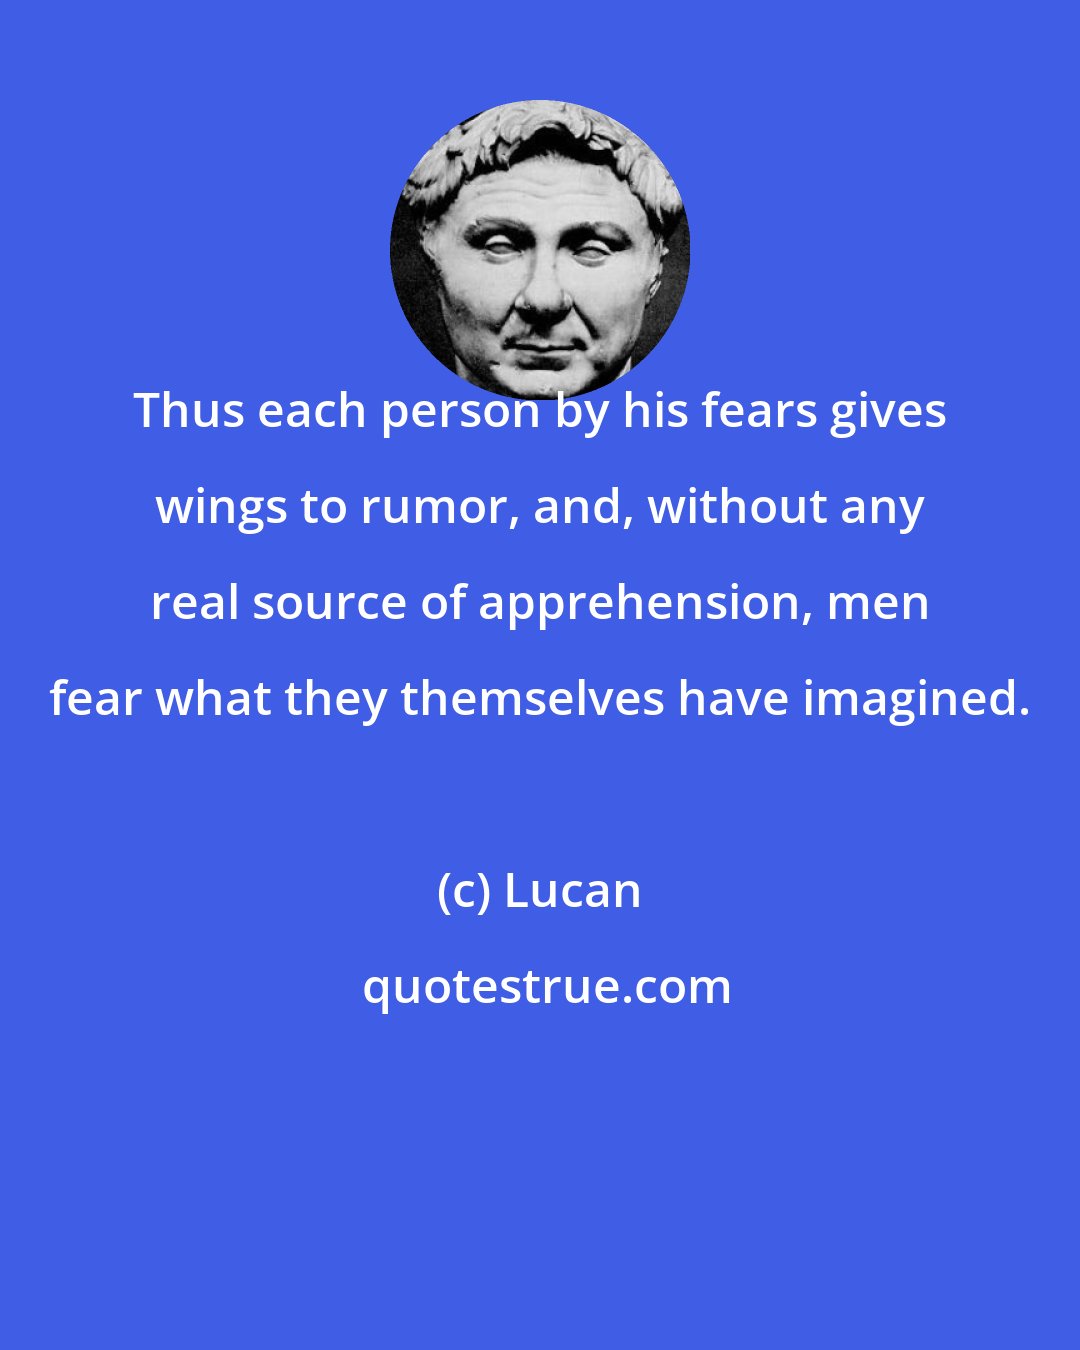 Lucan: Thus each person by his fears gives wings to rumor, and, without any real source of apprehension, men fear what they themselves have imagined.